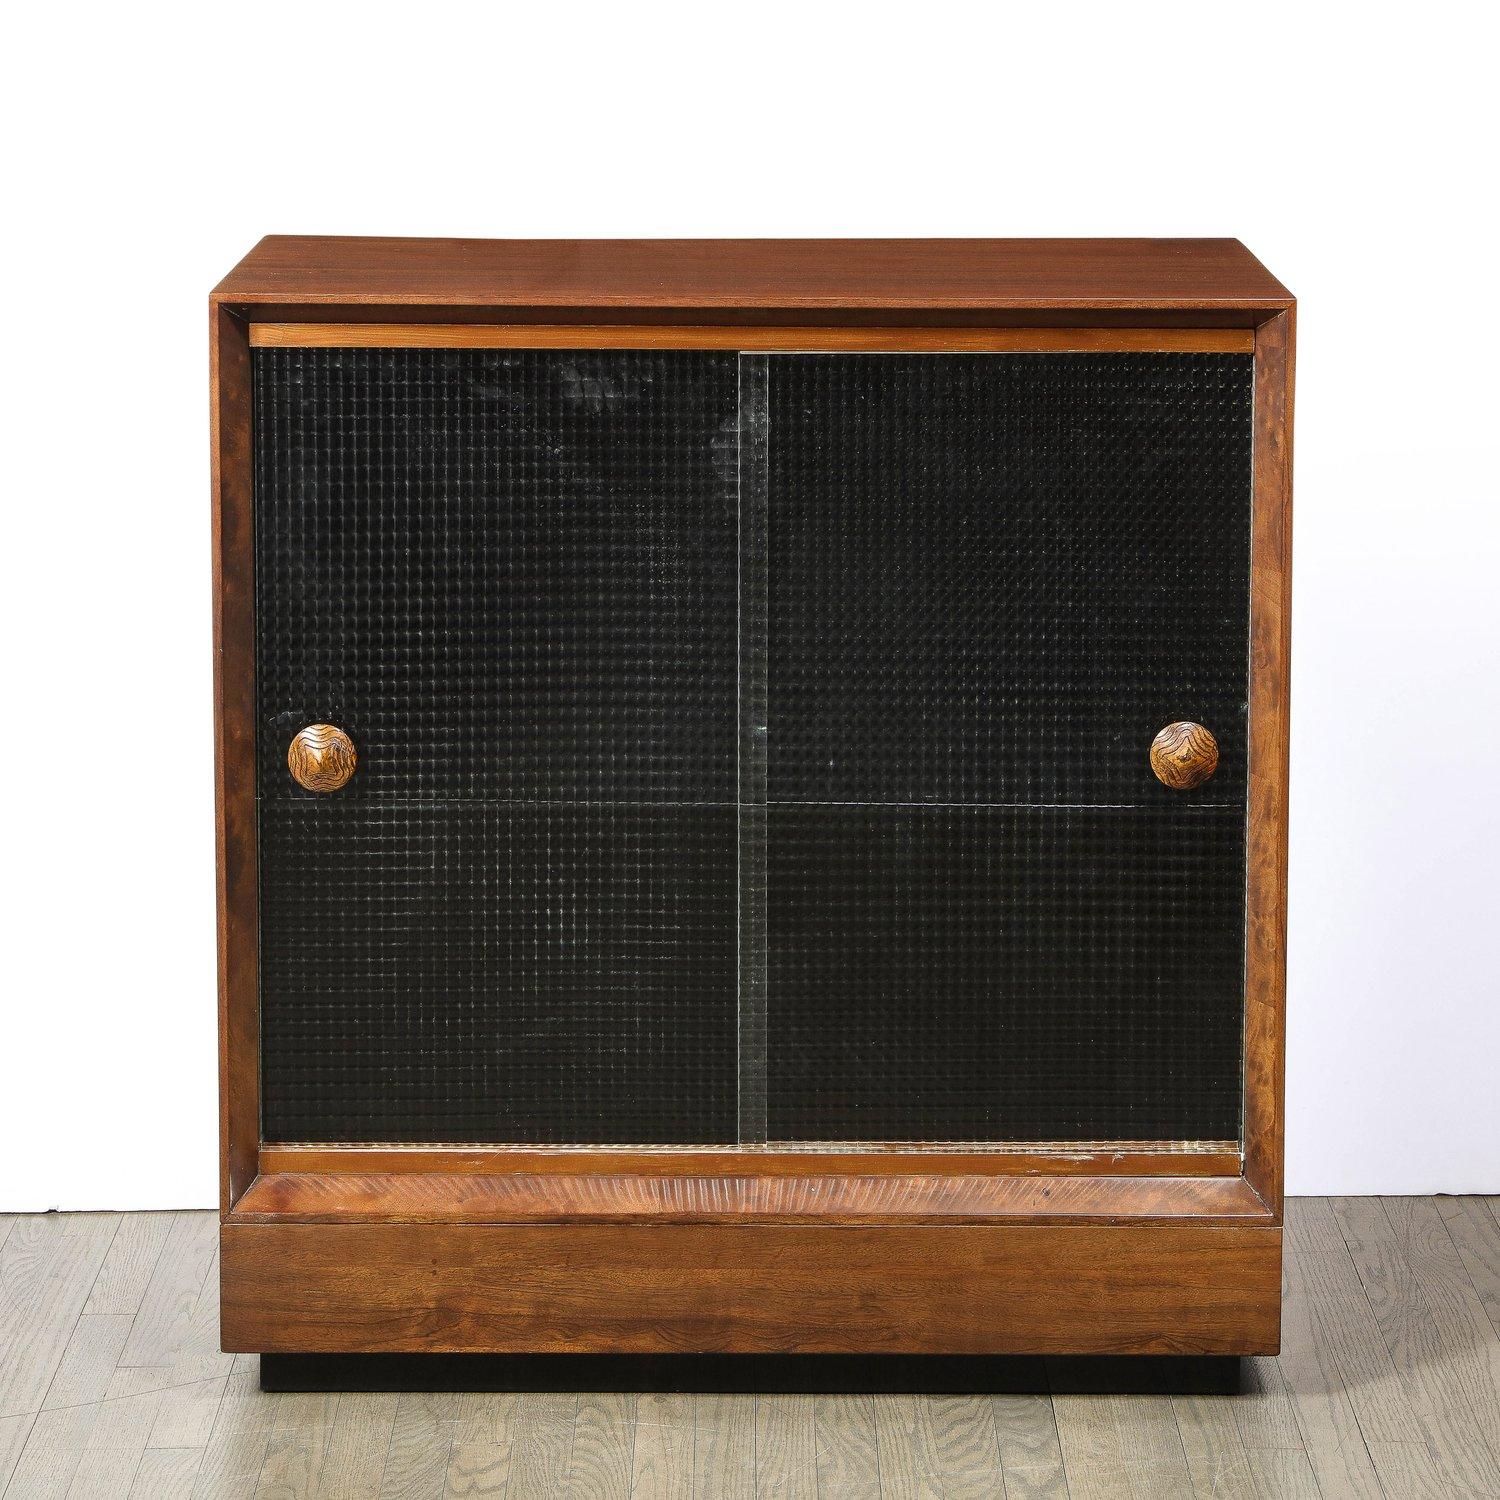 This beautiful Mid-Century Modern dry bar/ cabinet was realized by the illustrious American designer Gilbert Rohde, circa 1943. It features a volumetric rectangular body in bookmatched acacia with two sliding doors and a black lacquer inset base.